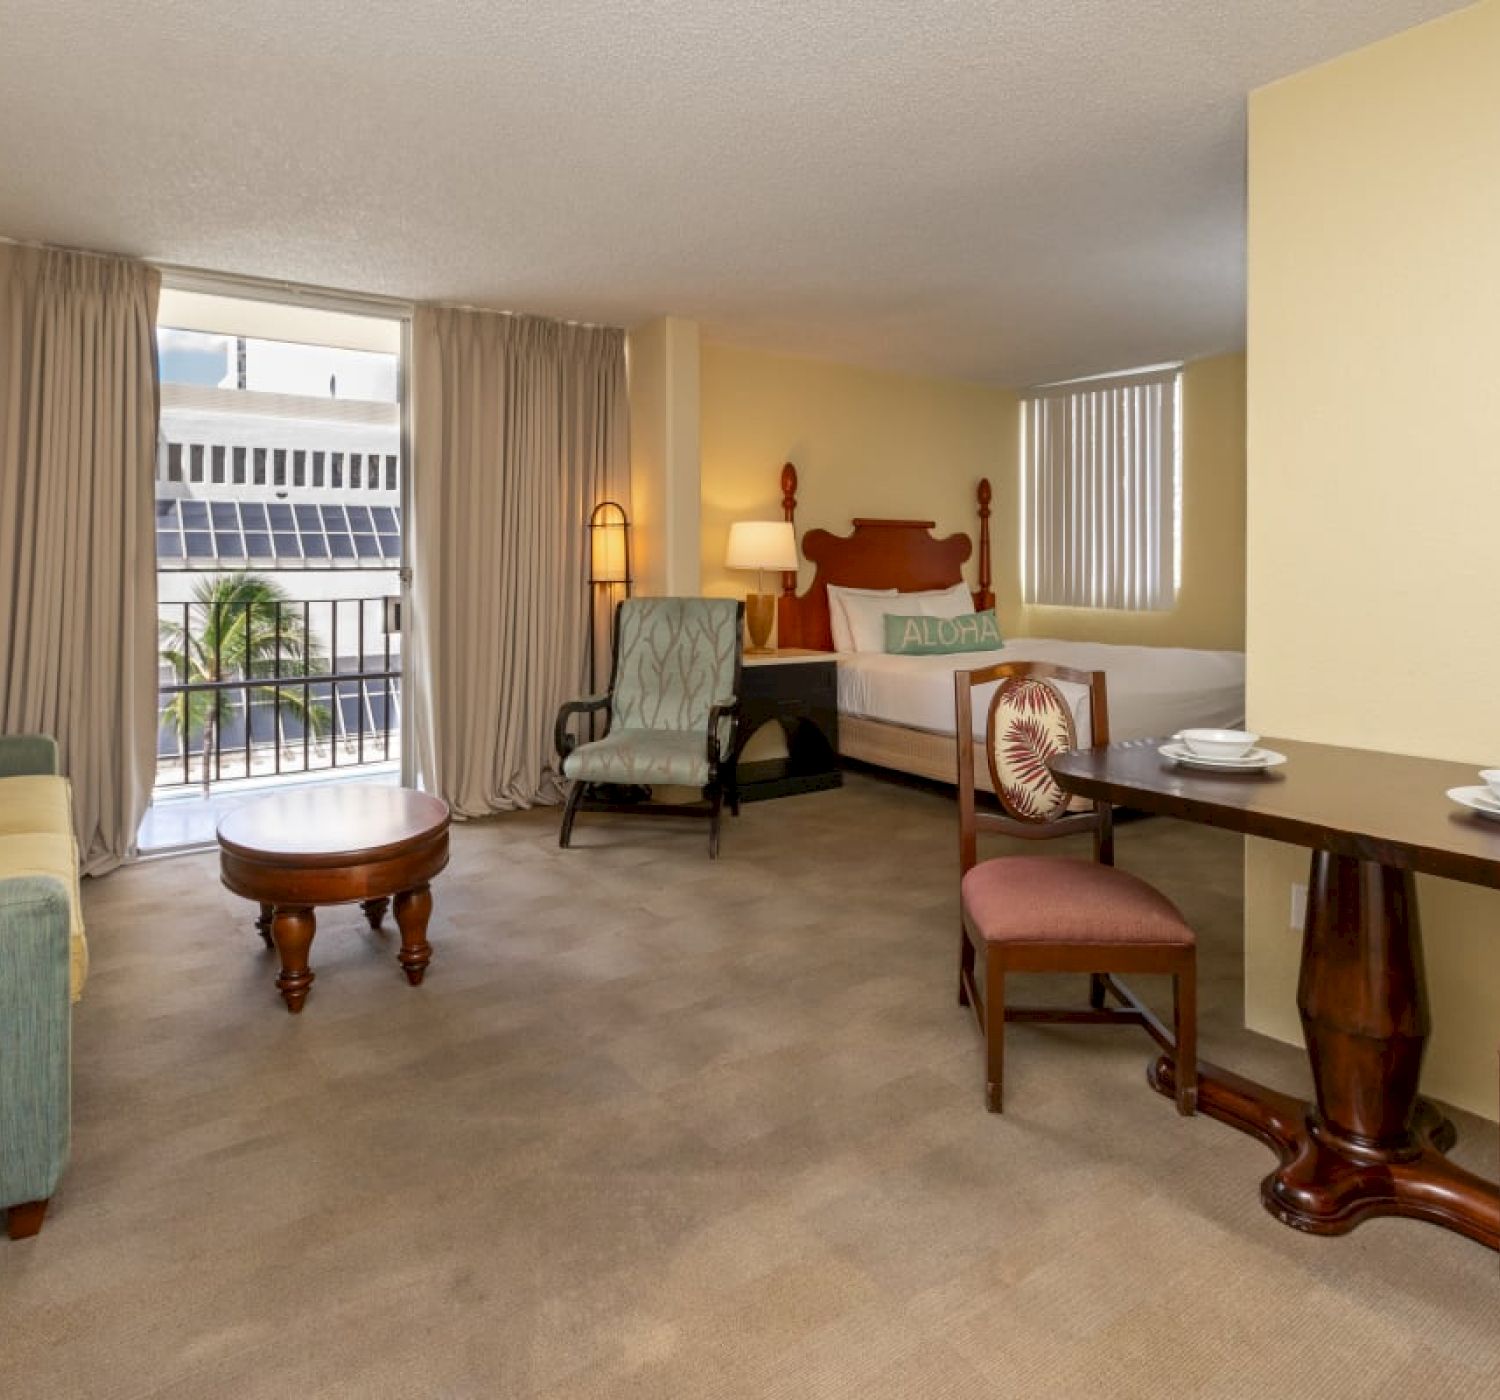 The image shows a hotel room with a seating area, table, chairs, coffee table, bed, and a window with curtains letting in natural light.